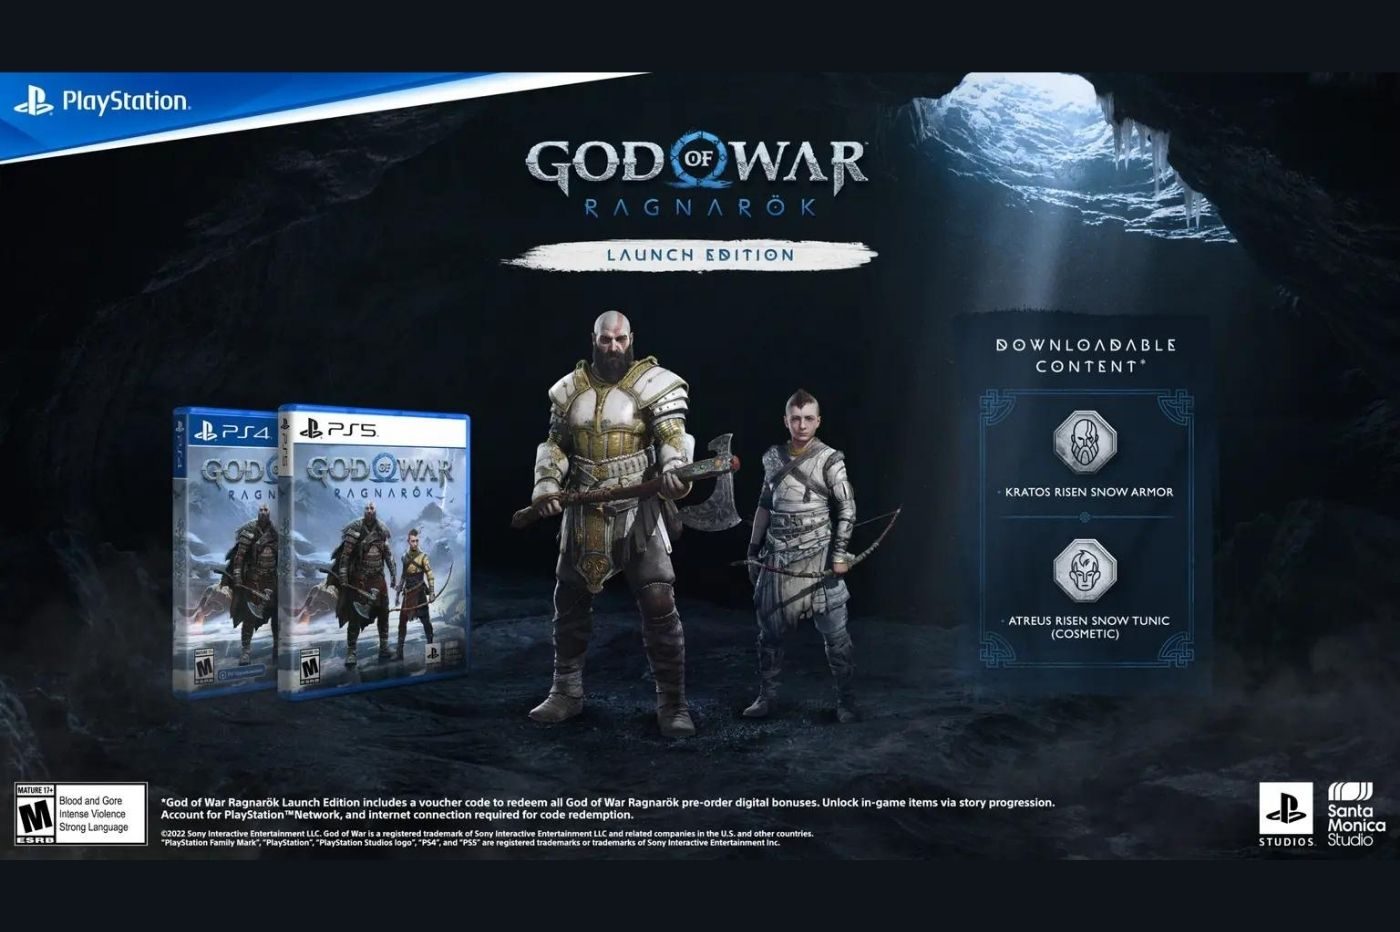 Promotional image of a special edition of God of War with its content.